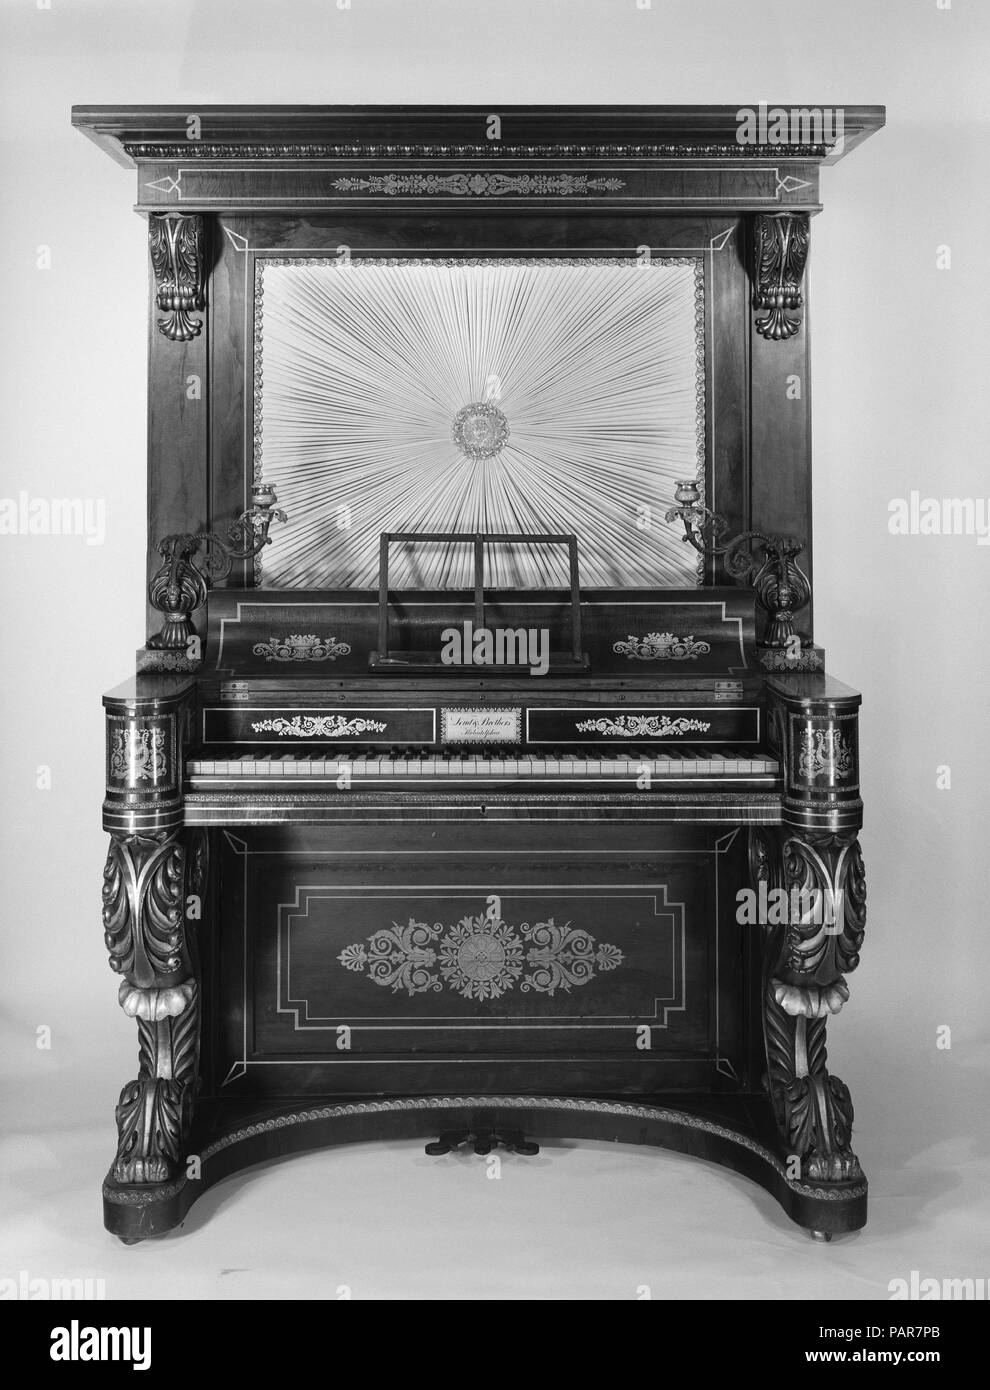 Upright Piano. Culture: American. Dimensions: 76 1/8 × 49 15/16 × 27 15/16 in. (193.3 × 126.9 × 71 cm). Maker: Loud & Brothers (American). Date: 1831.  This large upright piano takes the form of a secretary desk and has a case of carved rosewood with gild decoration. Its fabric panel (a modern replacement) the piano action. The keyboard compass is 73 keys (FF-f4) with ivory naturals and ebony accidentals. Two brass pivoting candleholders flank the keyboard.  There are three wooden pedals, the right raises the dampers, the center shifts the action for an una corda, and the left opens swell shut Stock Photo